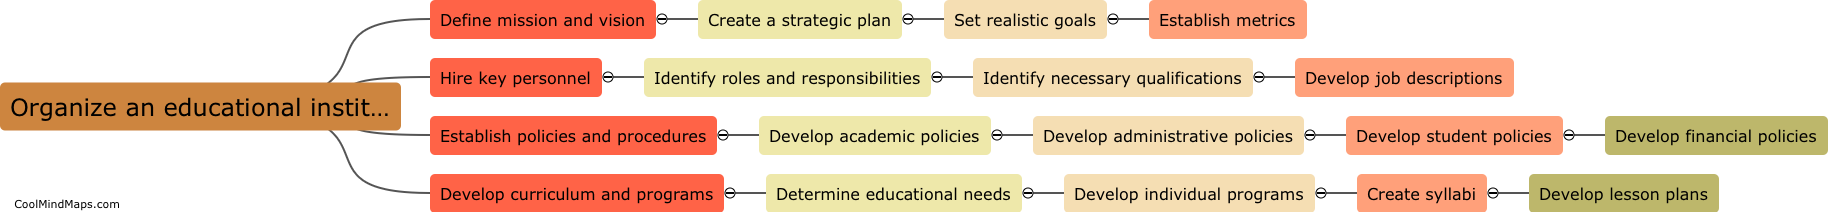 What are the steps to organize an educational institution?